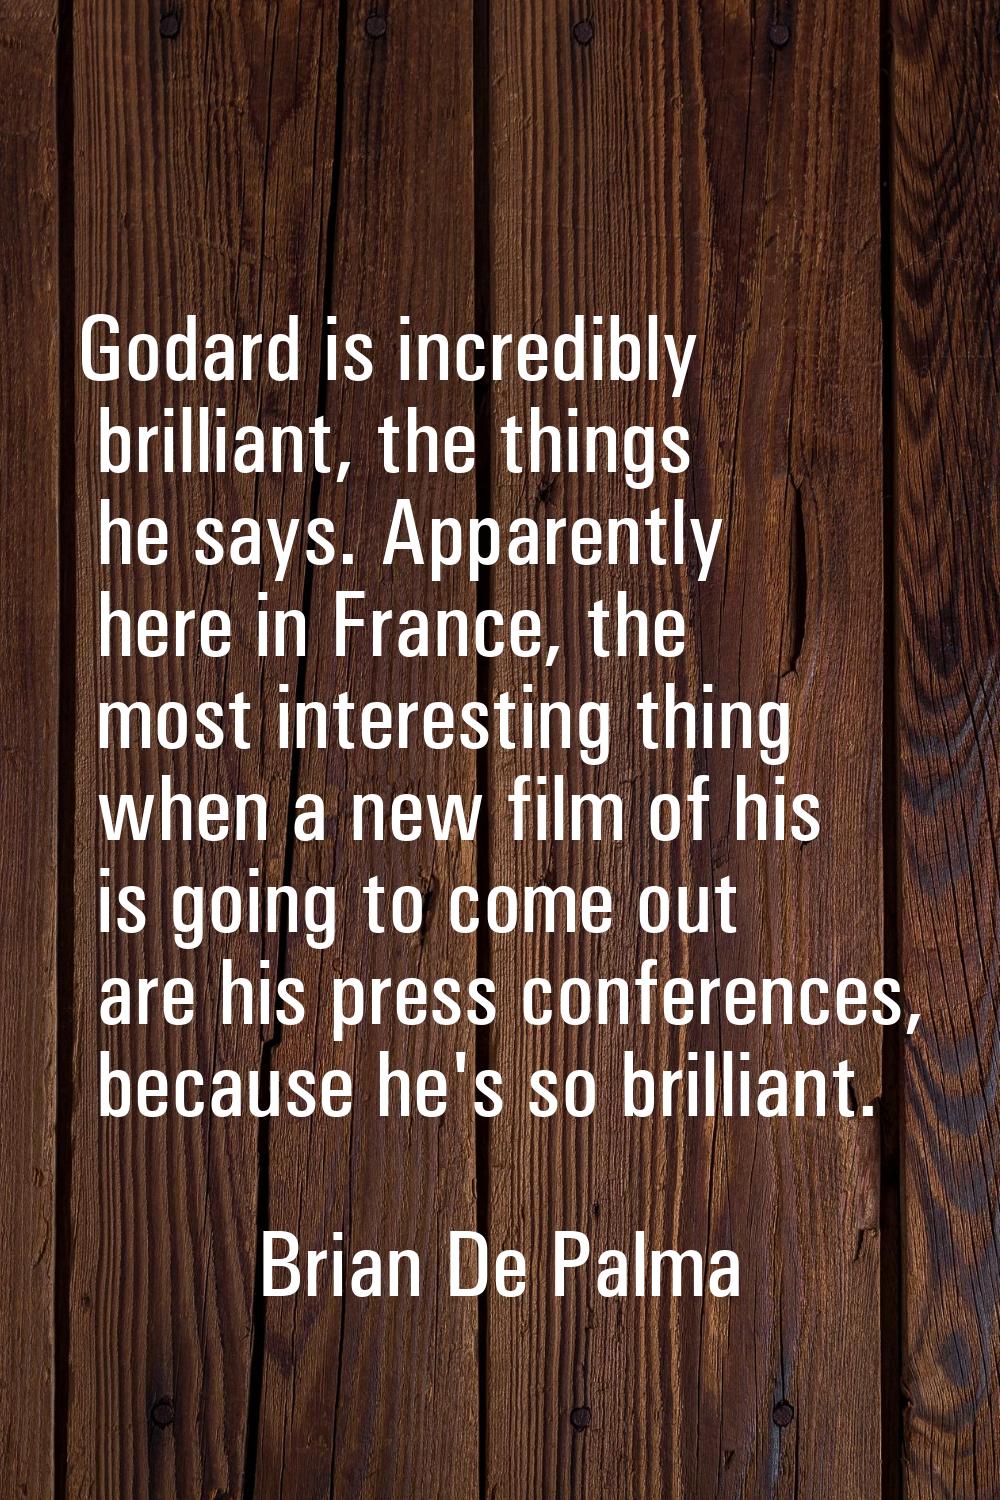 Godard is incredibly brilliant, the things he says. Apparently here in France, the most interesting